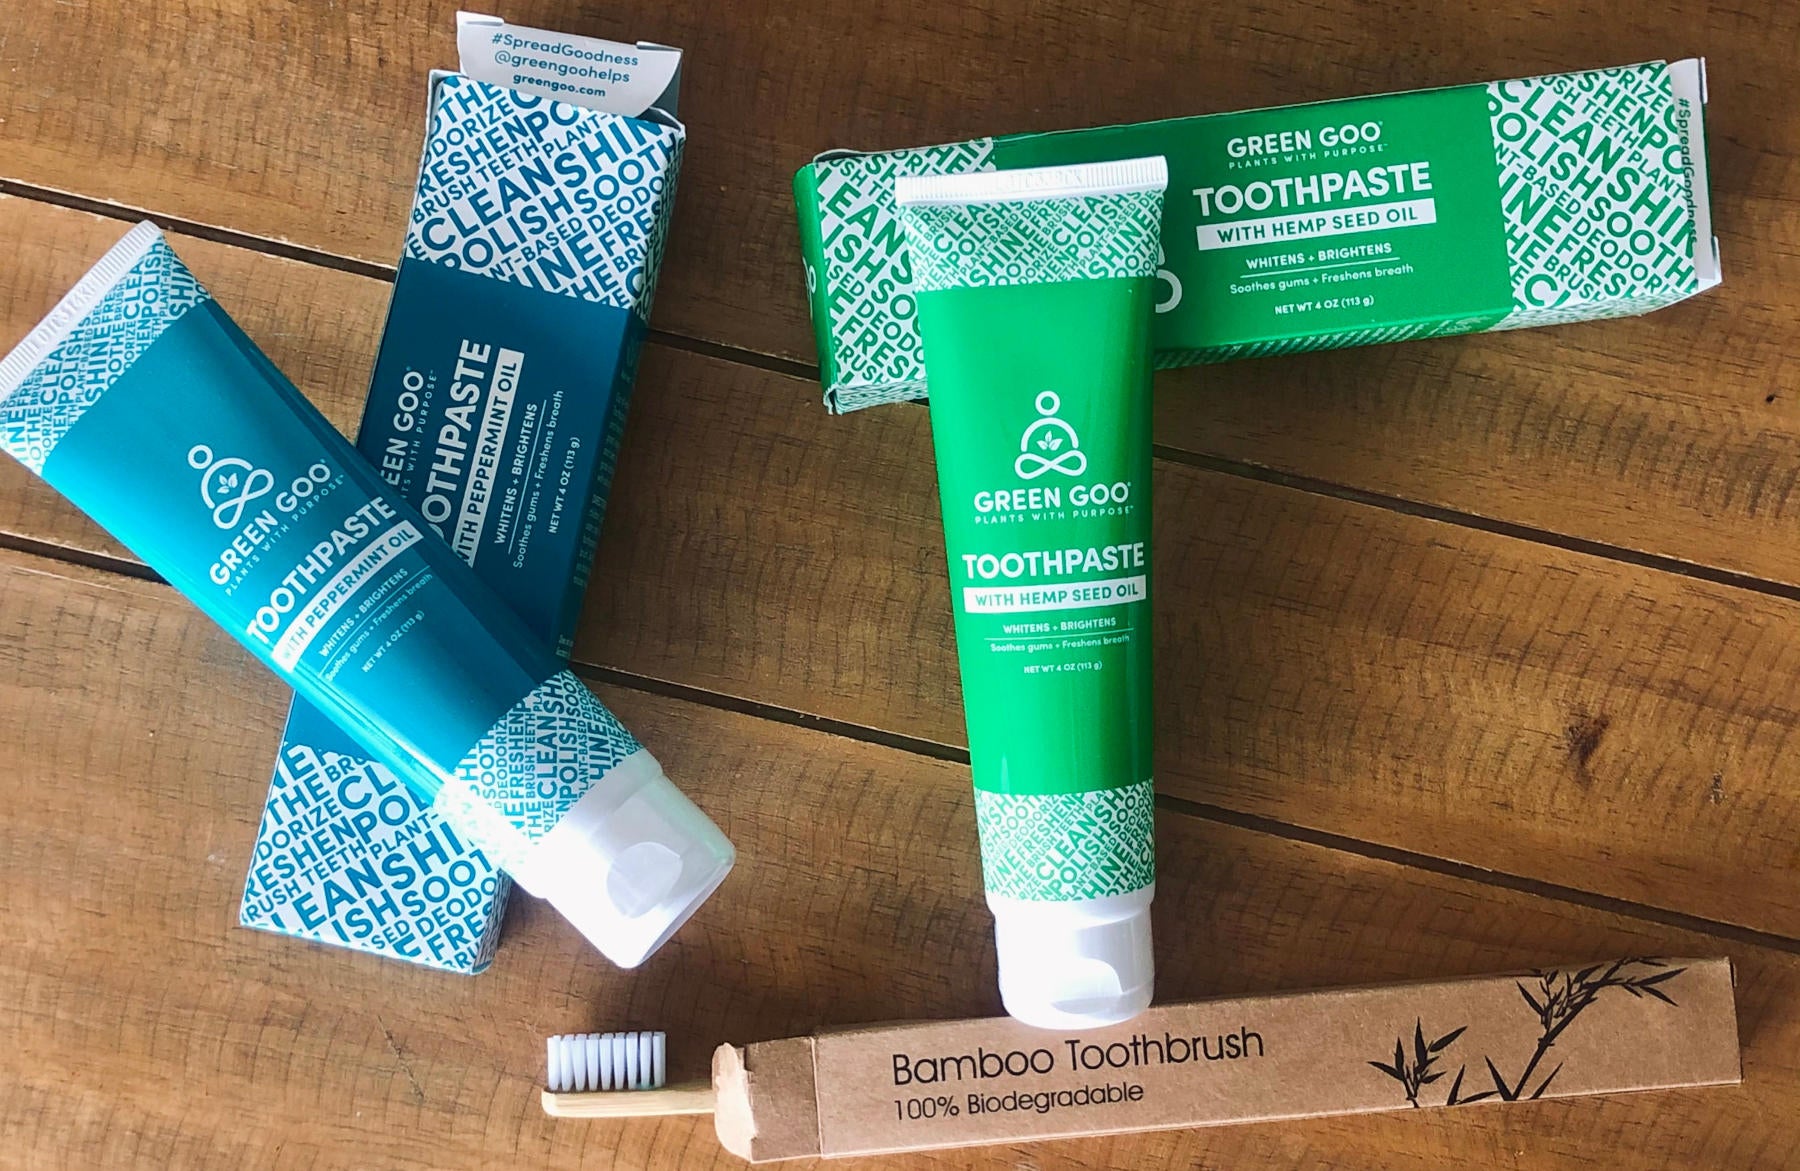 Green Goo Toothpastes with Peppermint and Hemp Seed Oil with plant-based Bamboo Toothbrush